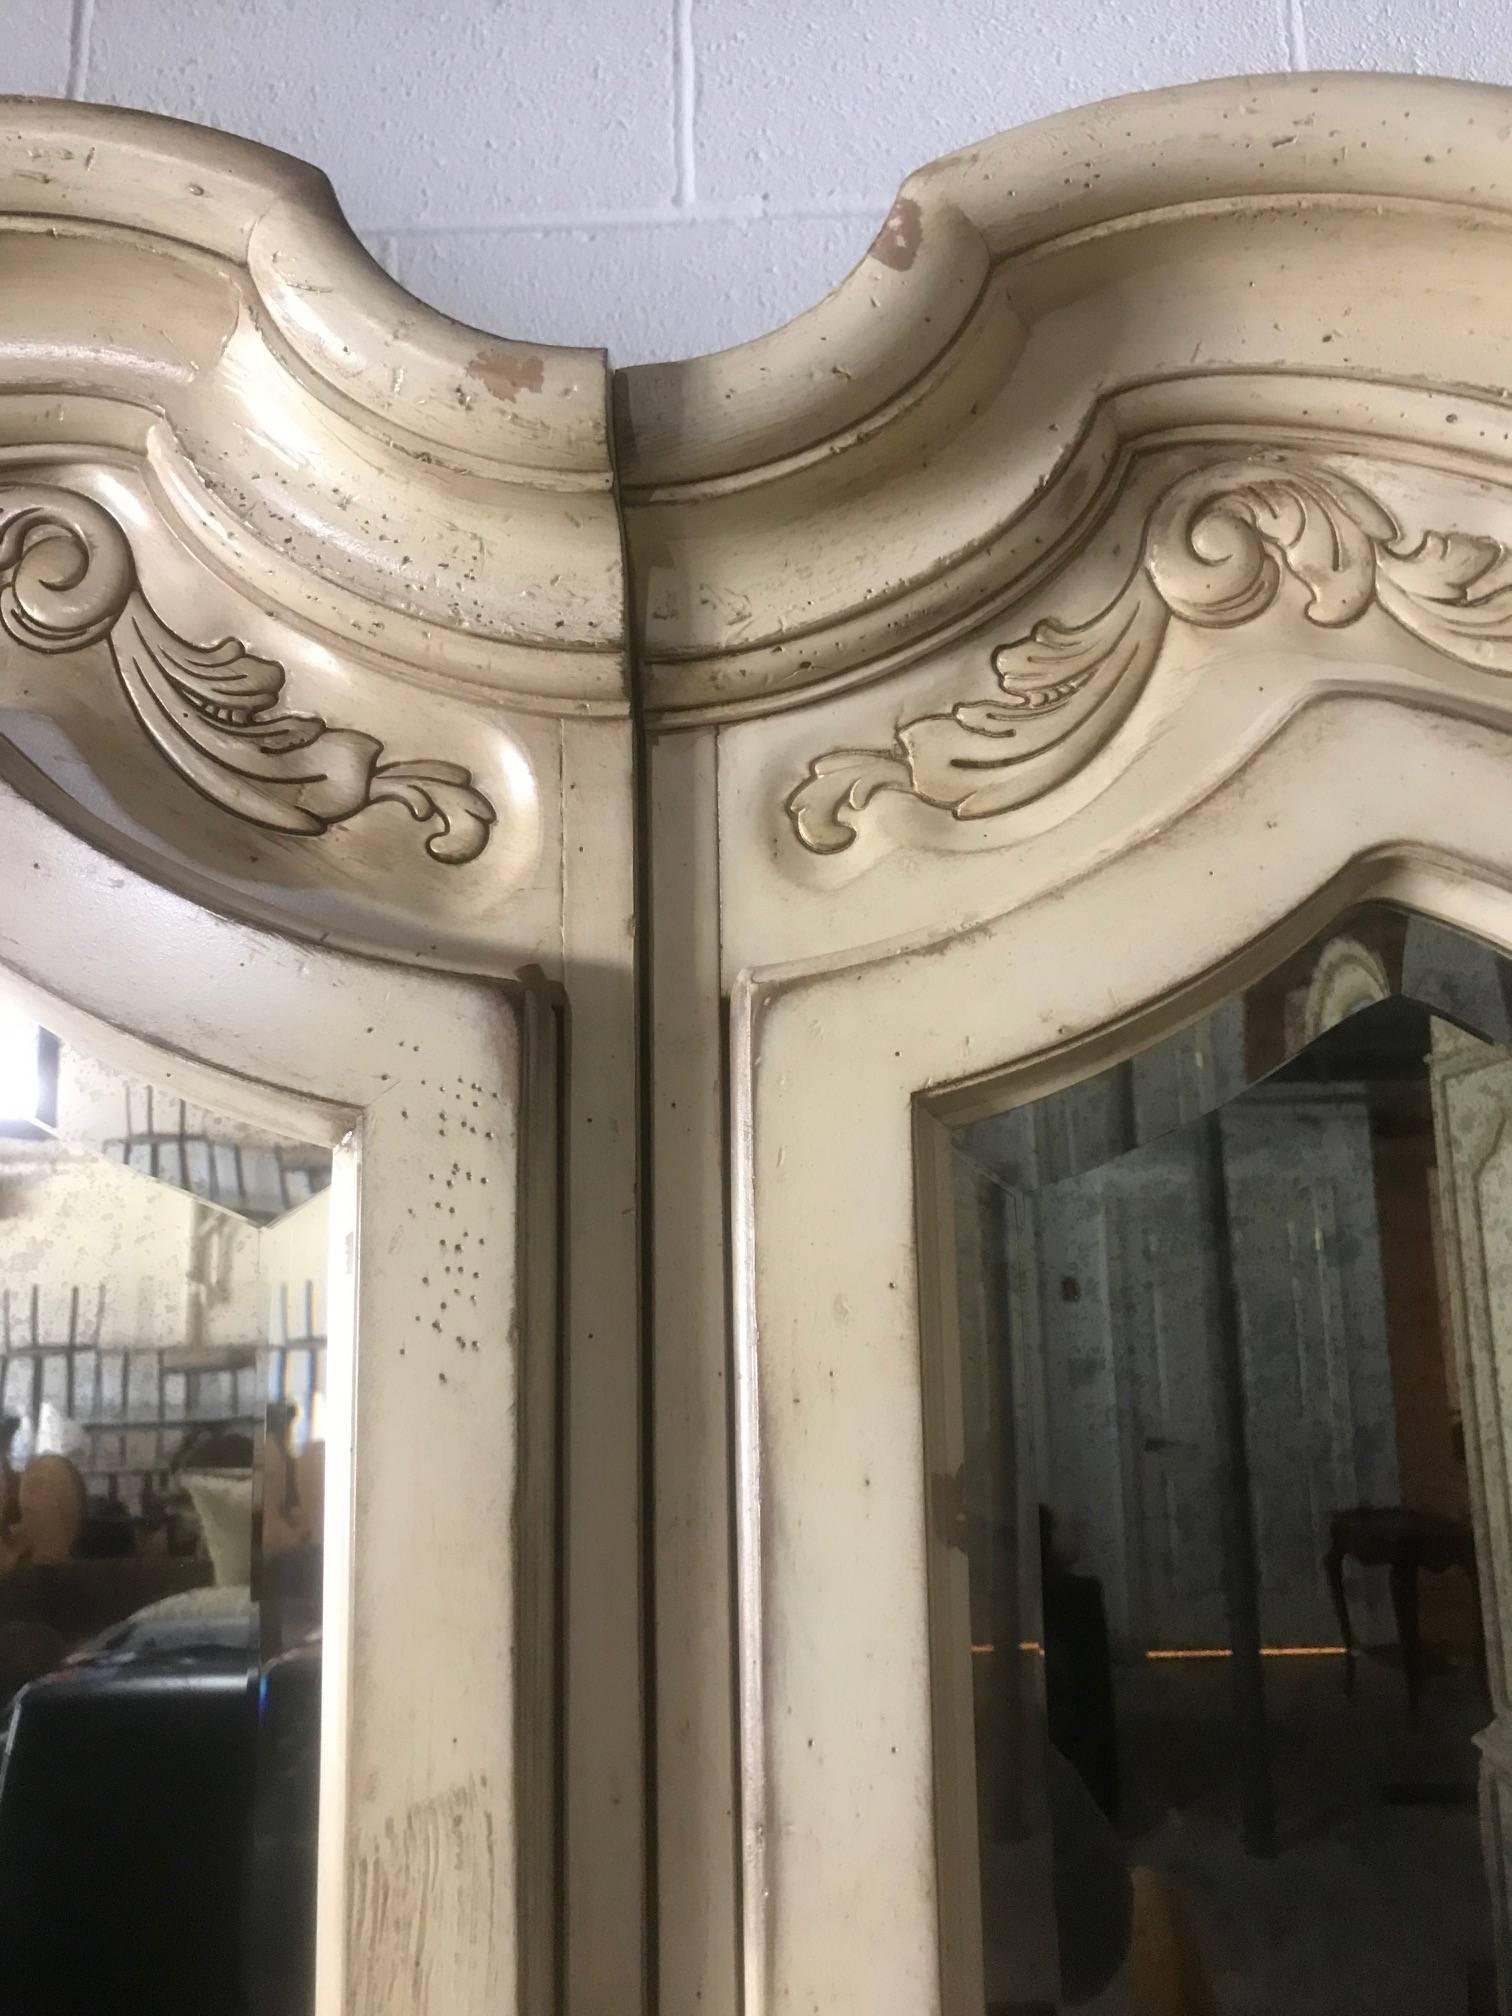 A romantic pair of century Cantal armoires having mirrored doors, carved wood decoration at the top with adjustable shelves inside, and painted a special cream antiqued Biscay. We are selling them as a pair, but they also have the large armoire that